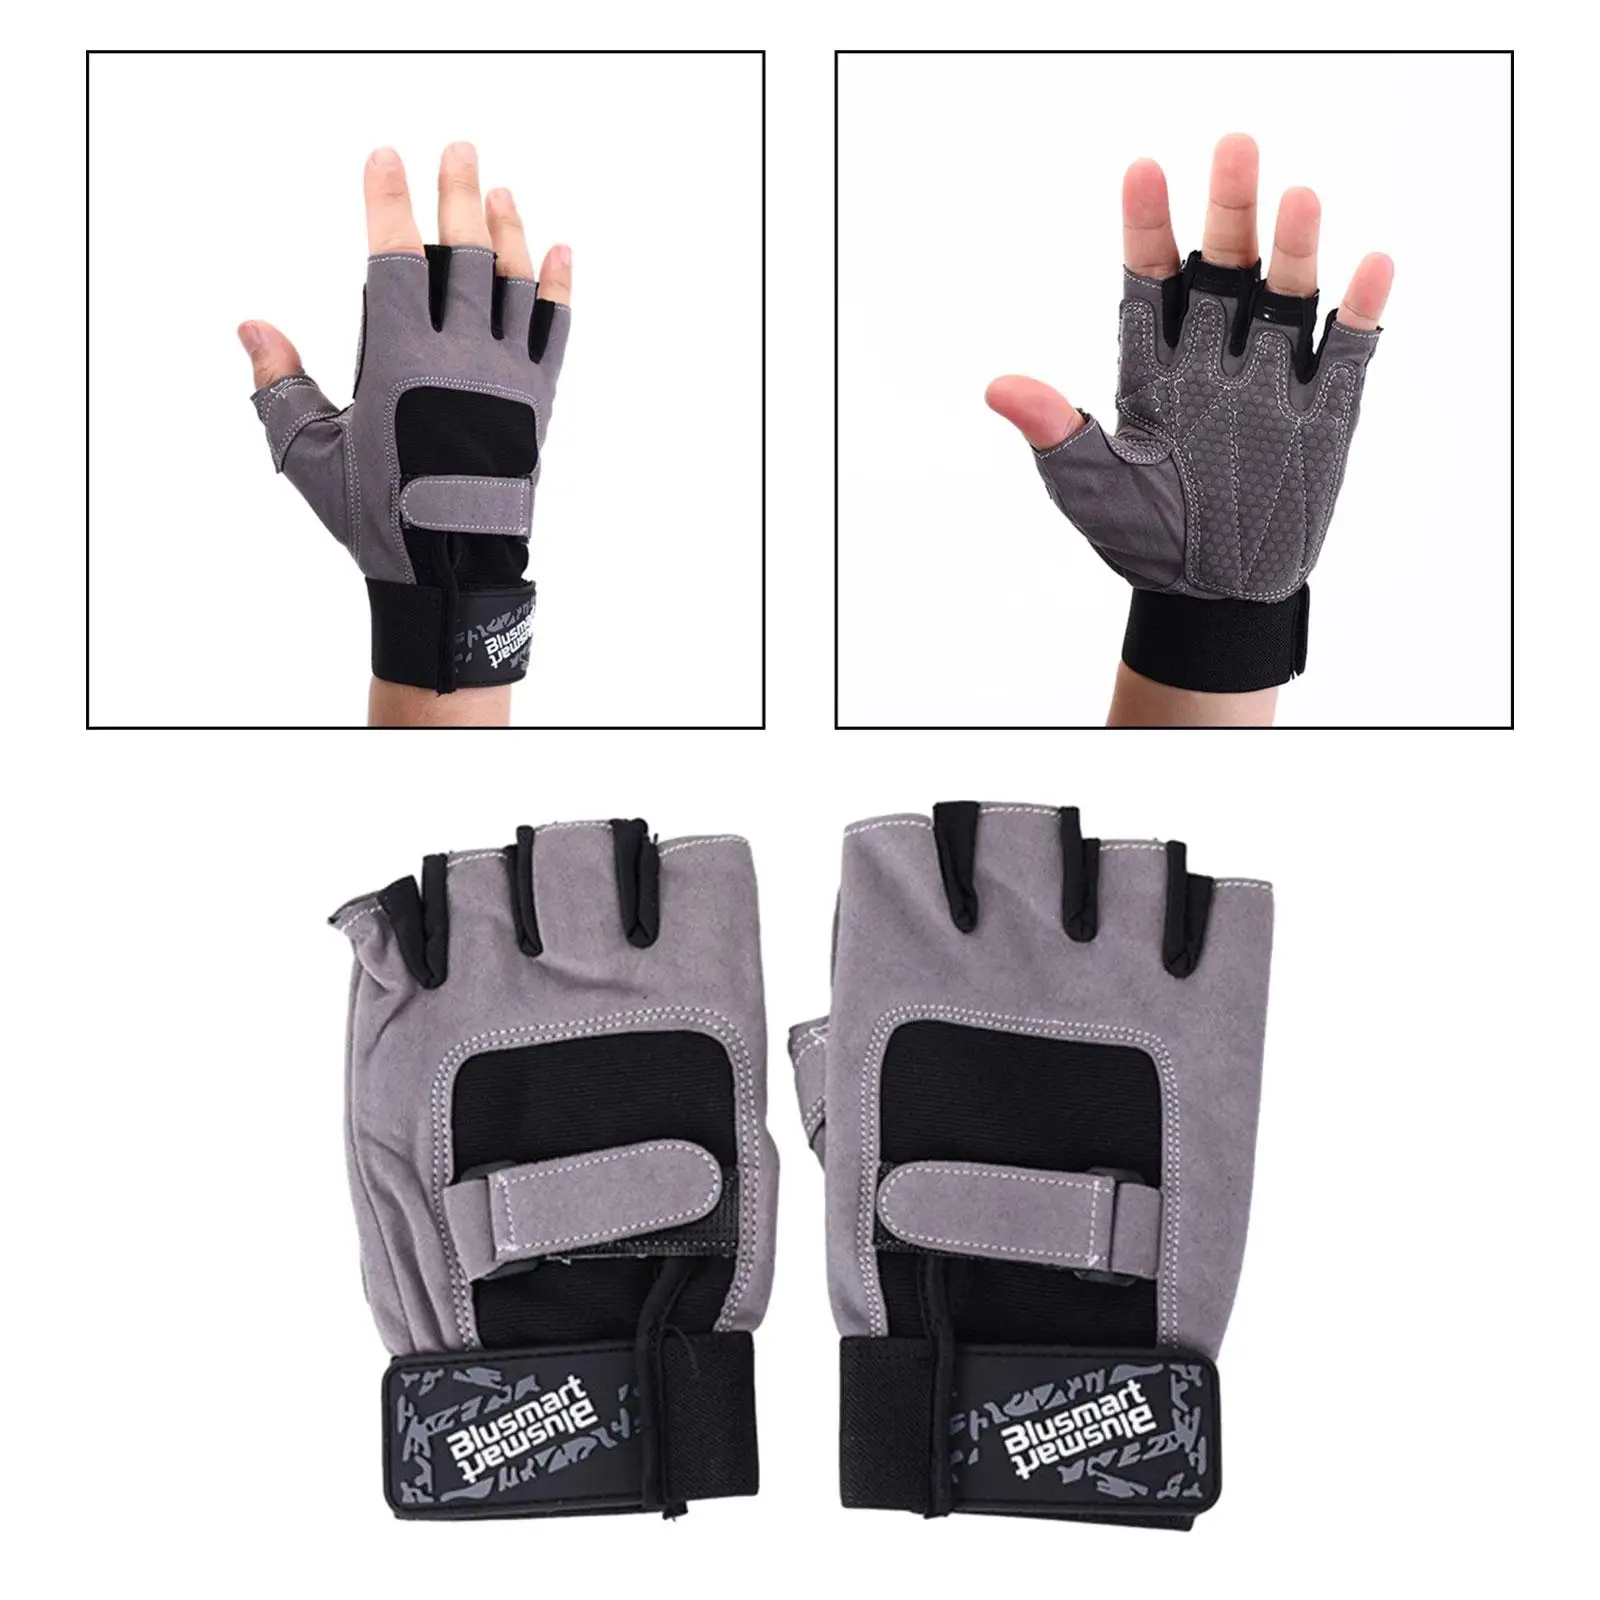 Workout Gloves Sports Gloves Exercise Gloves for Fitness Climbing Workout